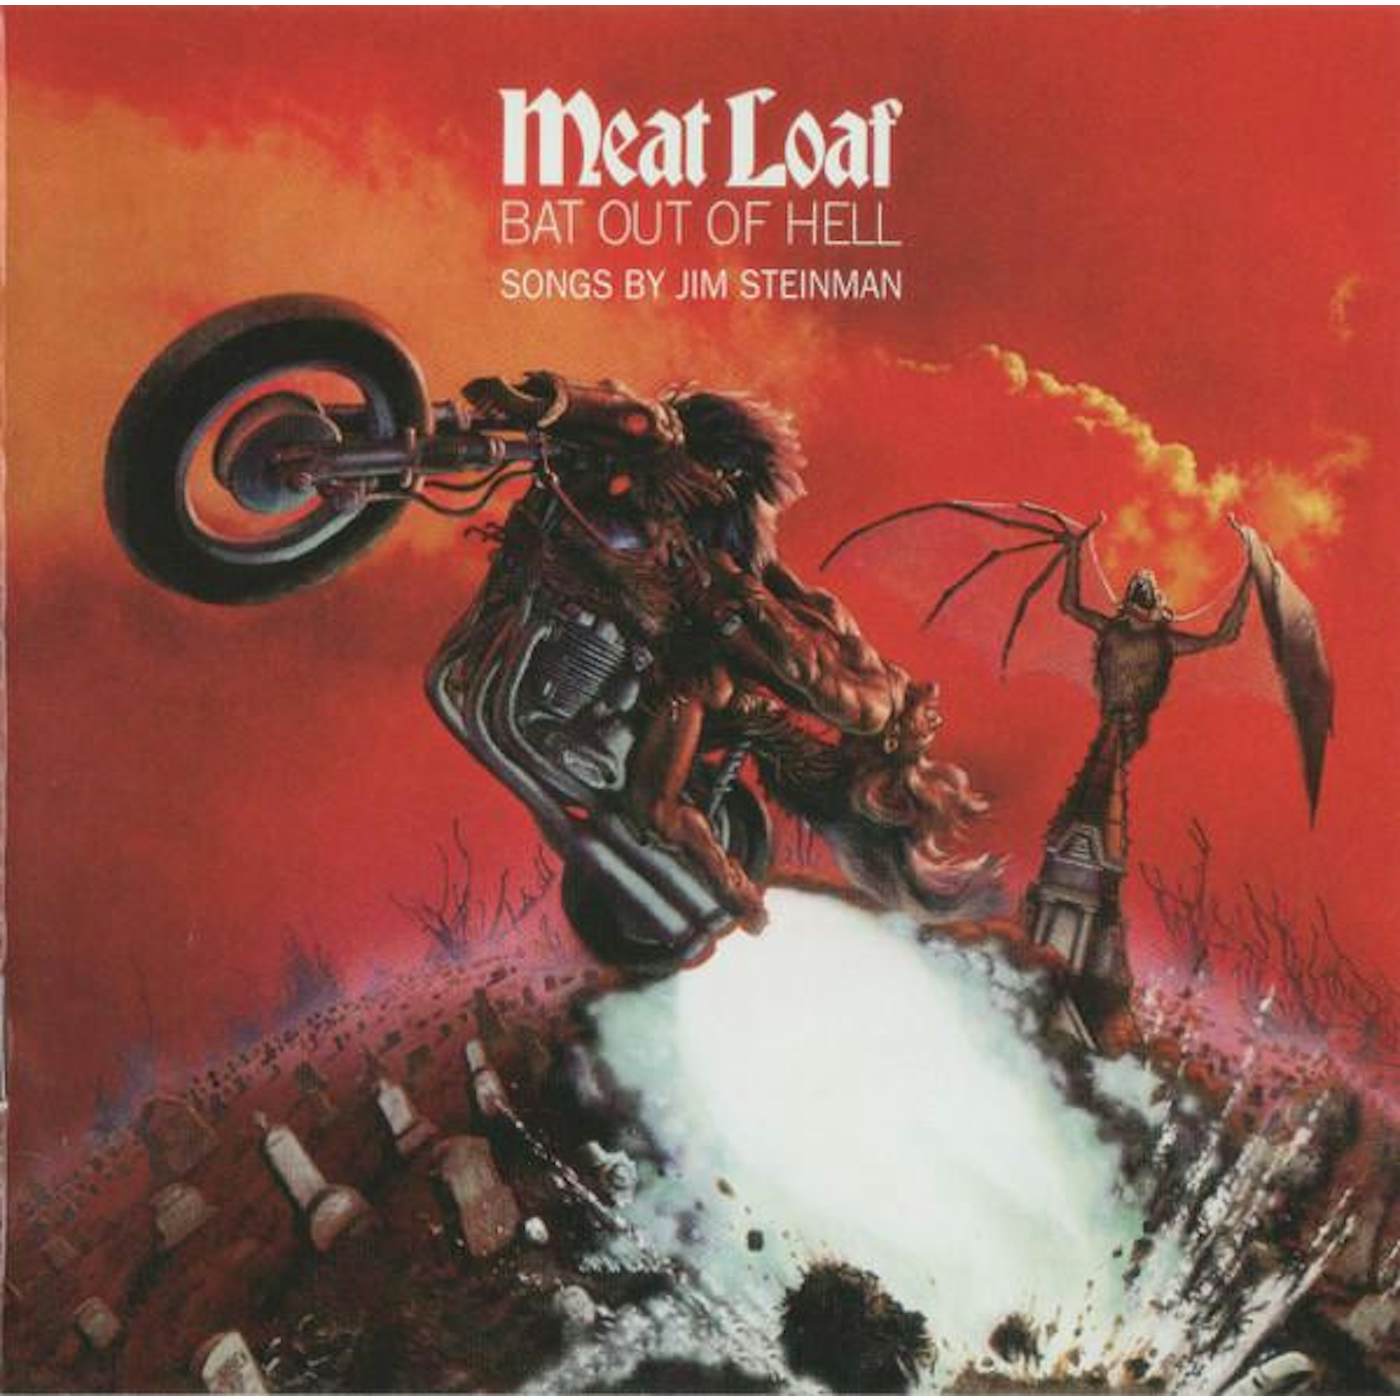 Meat Loaf BAT OUT OF HELL CD